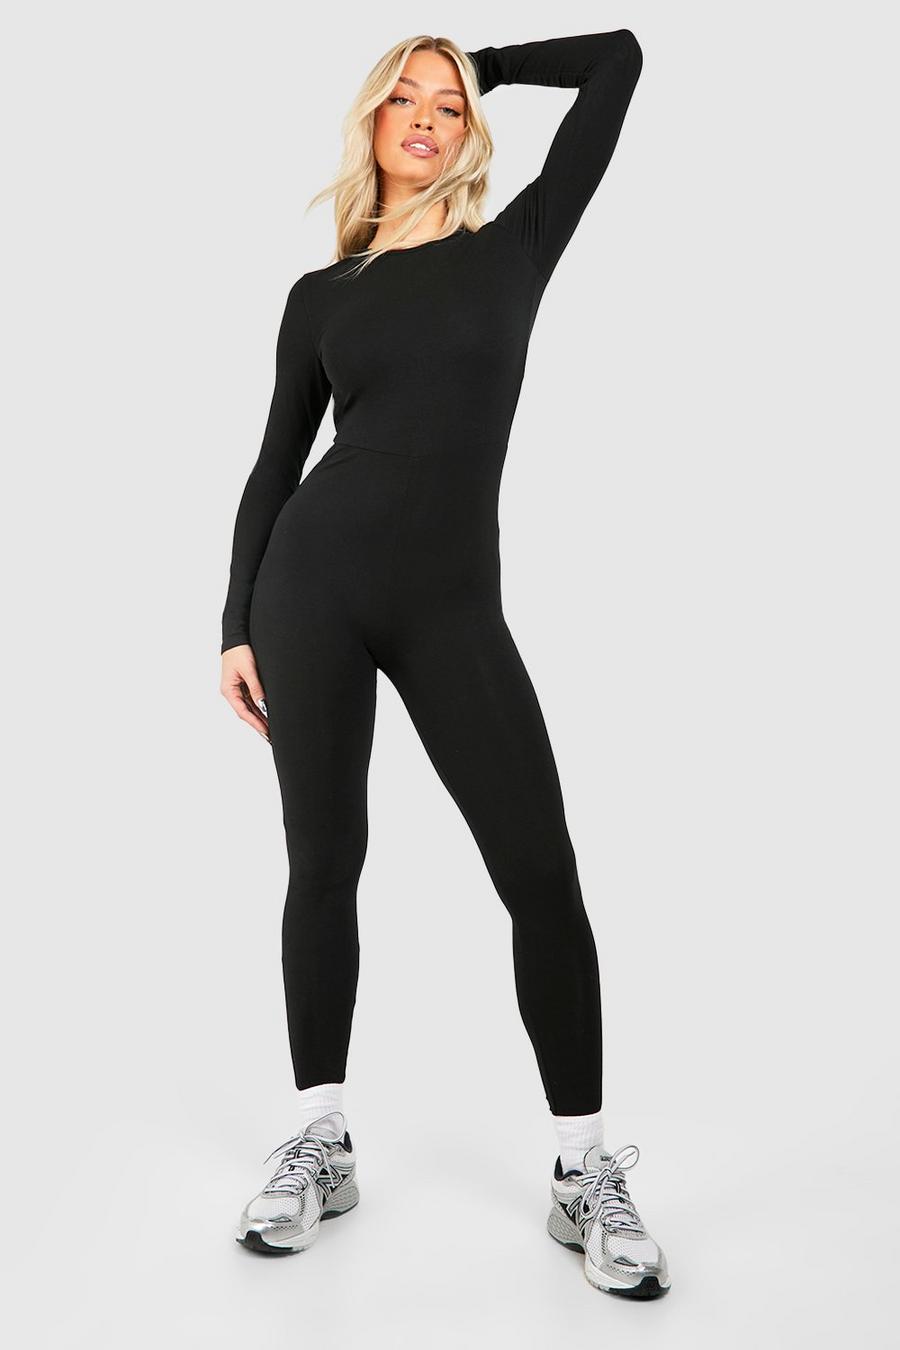 ASOS DESIGN strappy soft touch unitard jumpsuit in black